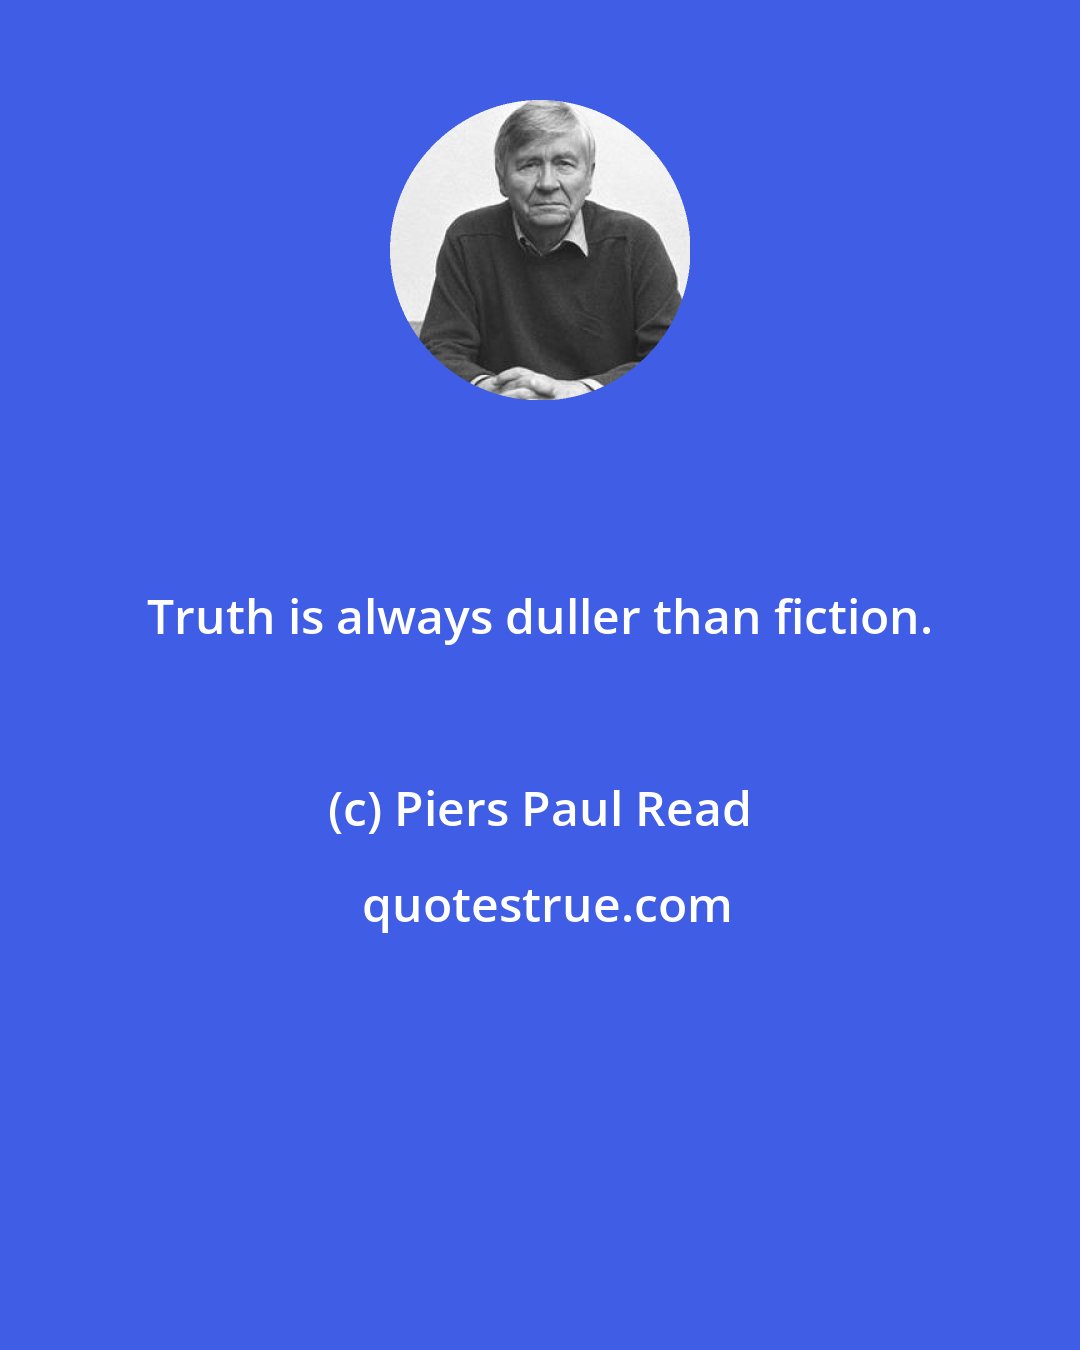 Piers Paul Read: Truth is always duller than fiction.